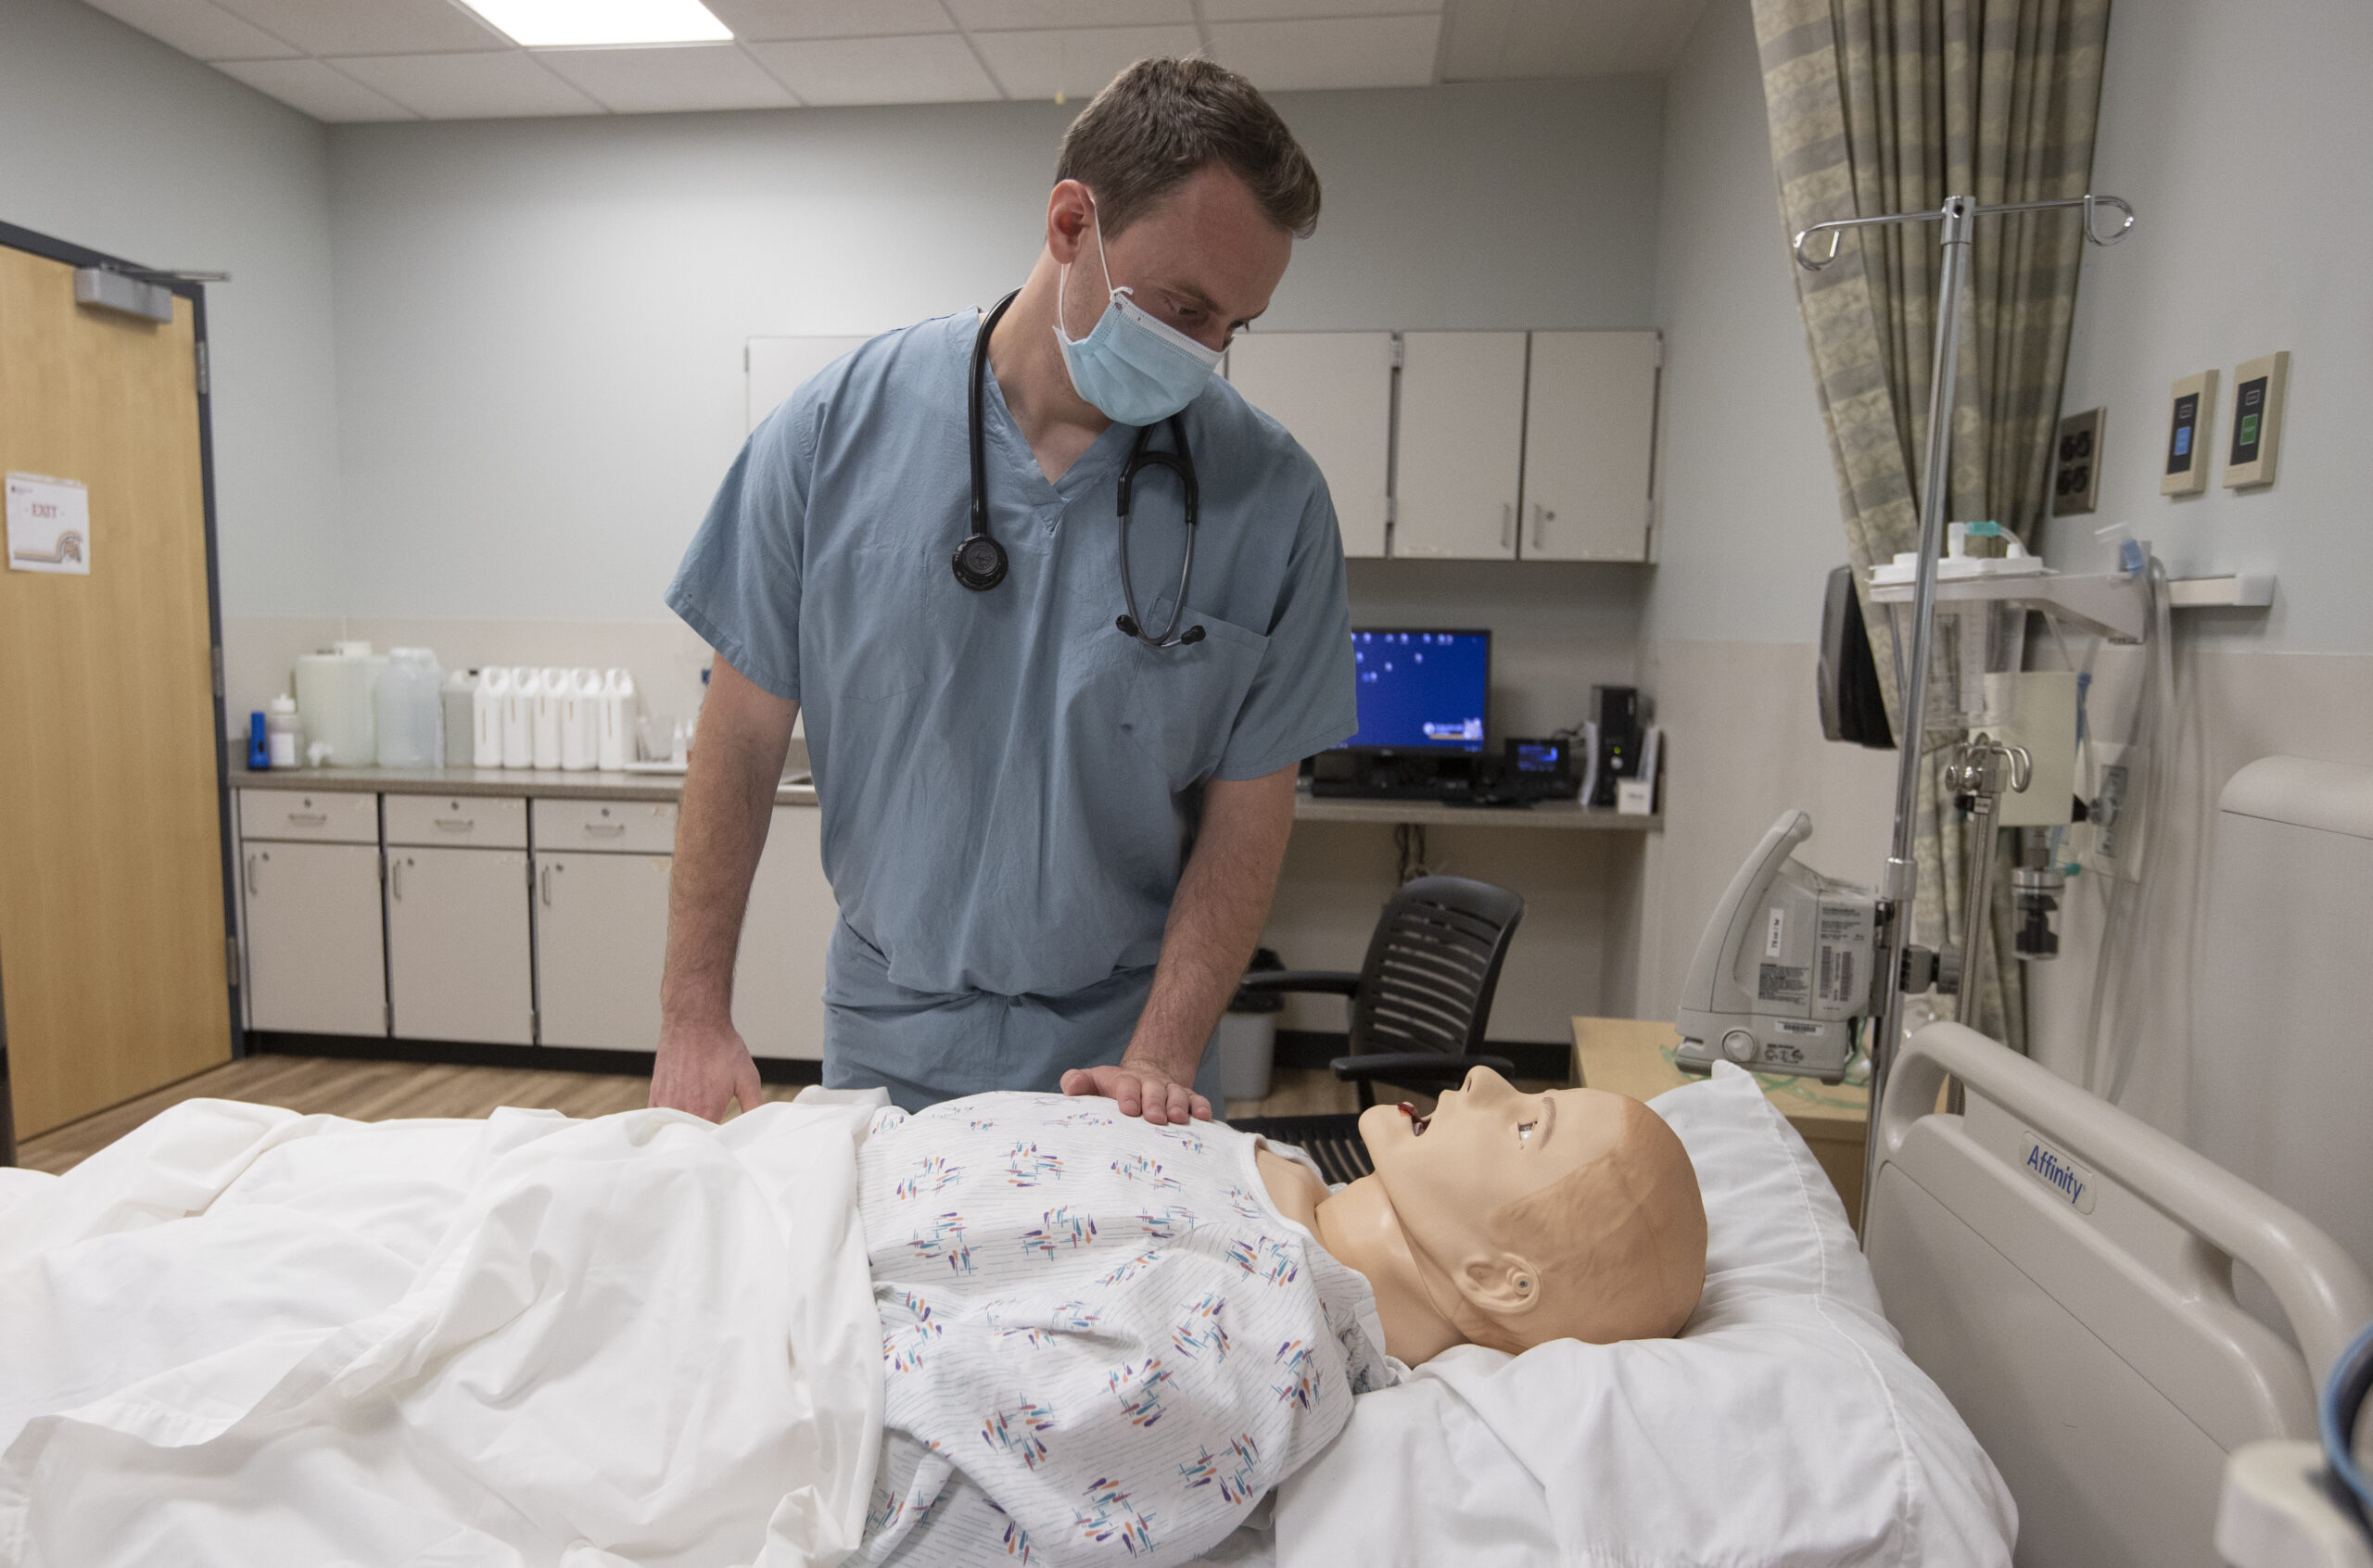 nursing student looking down at bed patient manikin